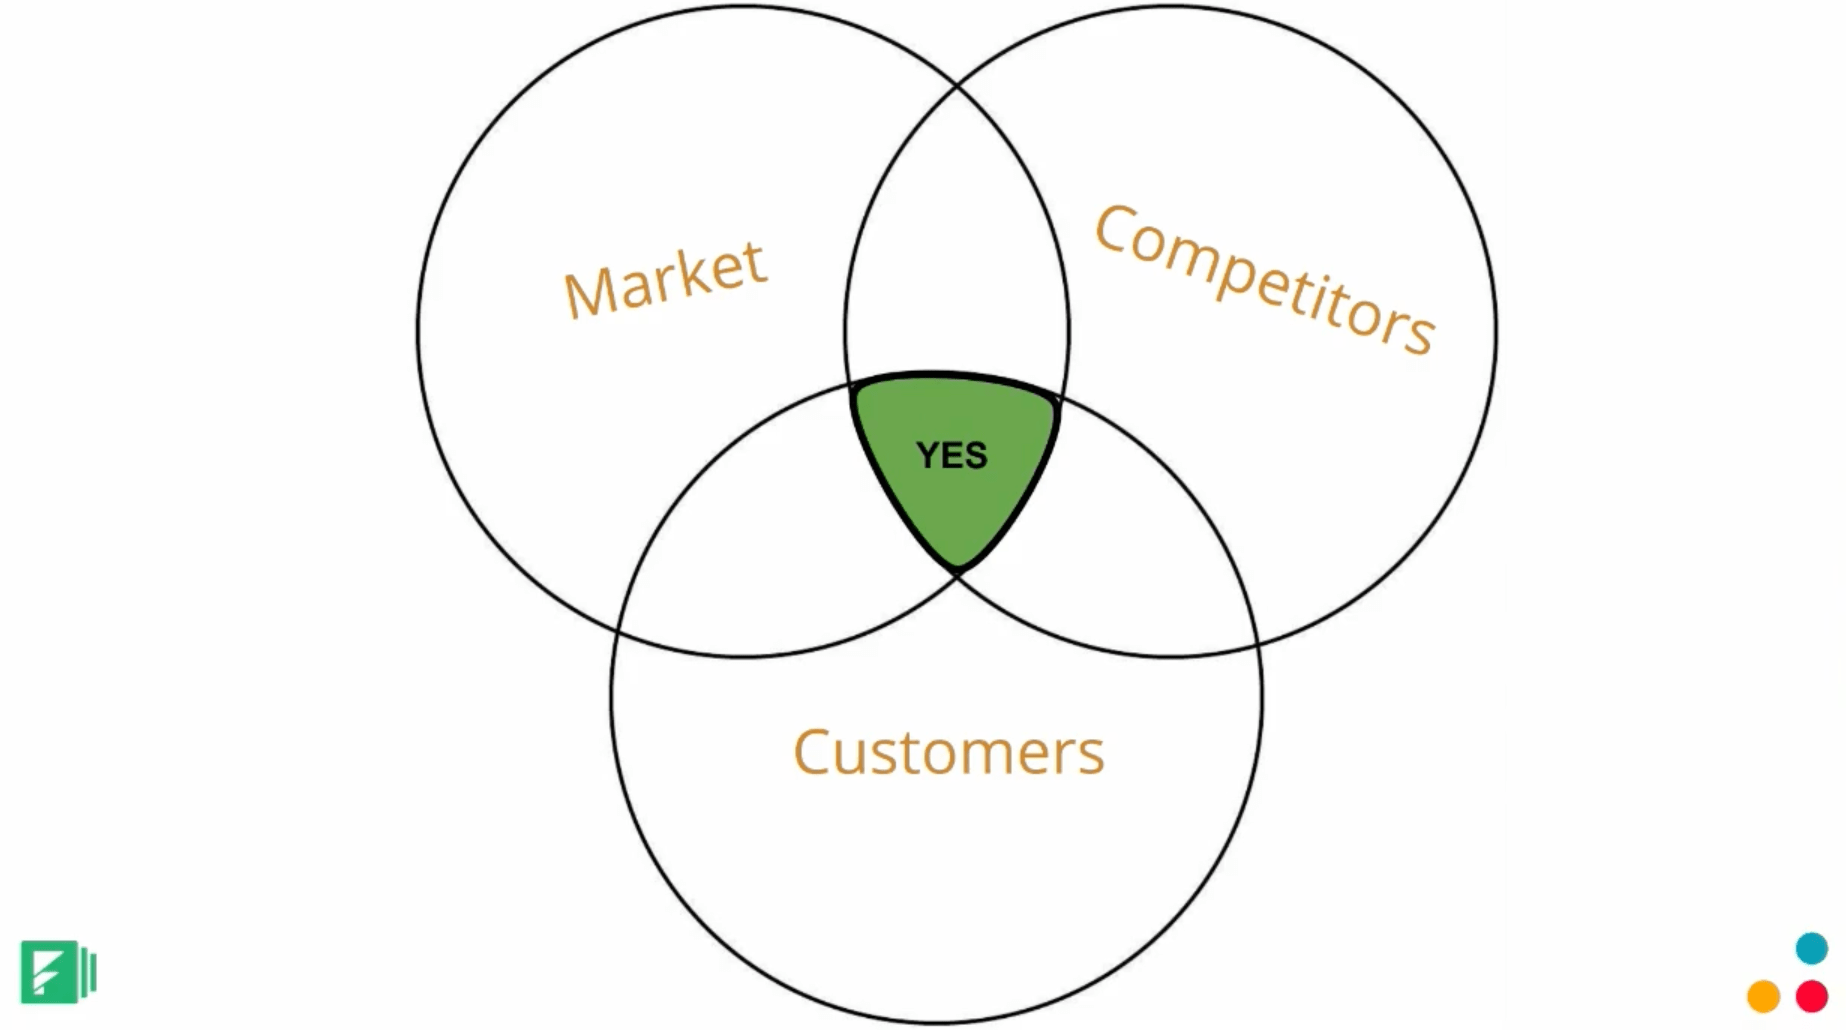 We're looking at the intersection of all of those and that's where you should start. Those are where you should make your initial list of competitors that you want to focus on. Where the market says, your competitors say, and who your customers say. 